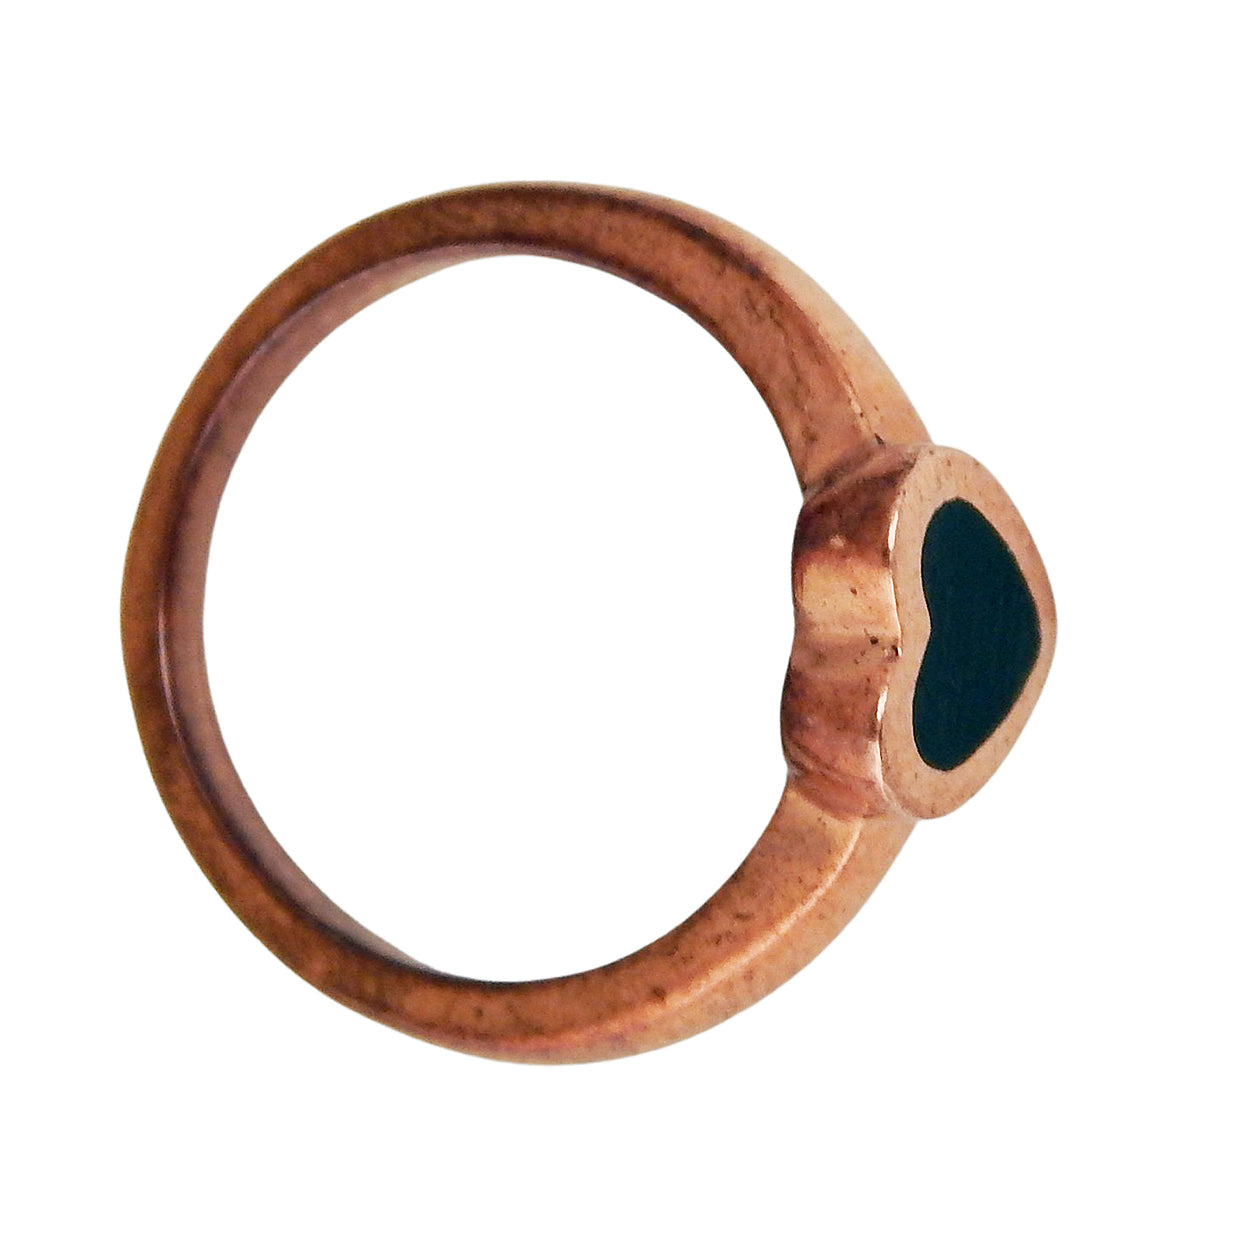 MARCOS - &quot;TINY HEART RING&quot; in Copper with EBONY Wood Inlay